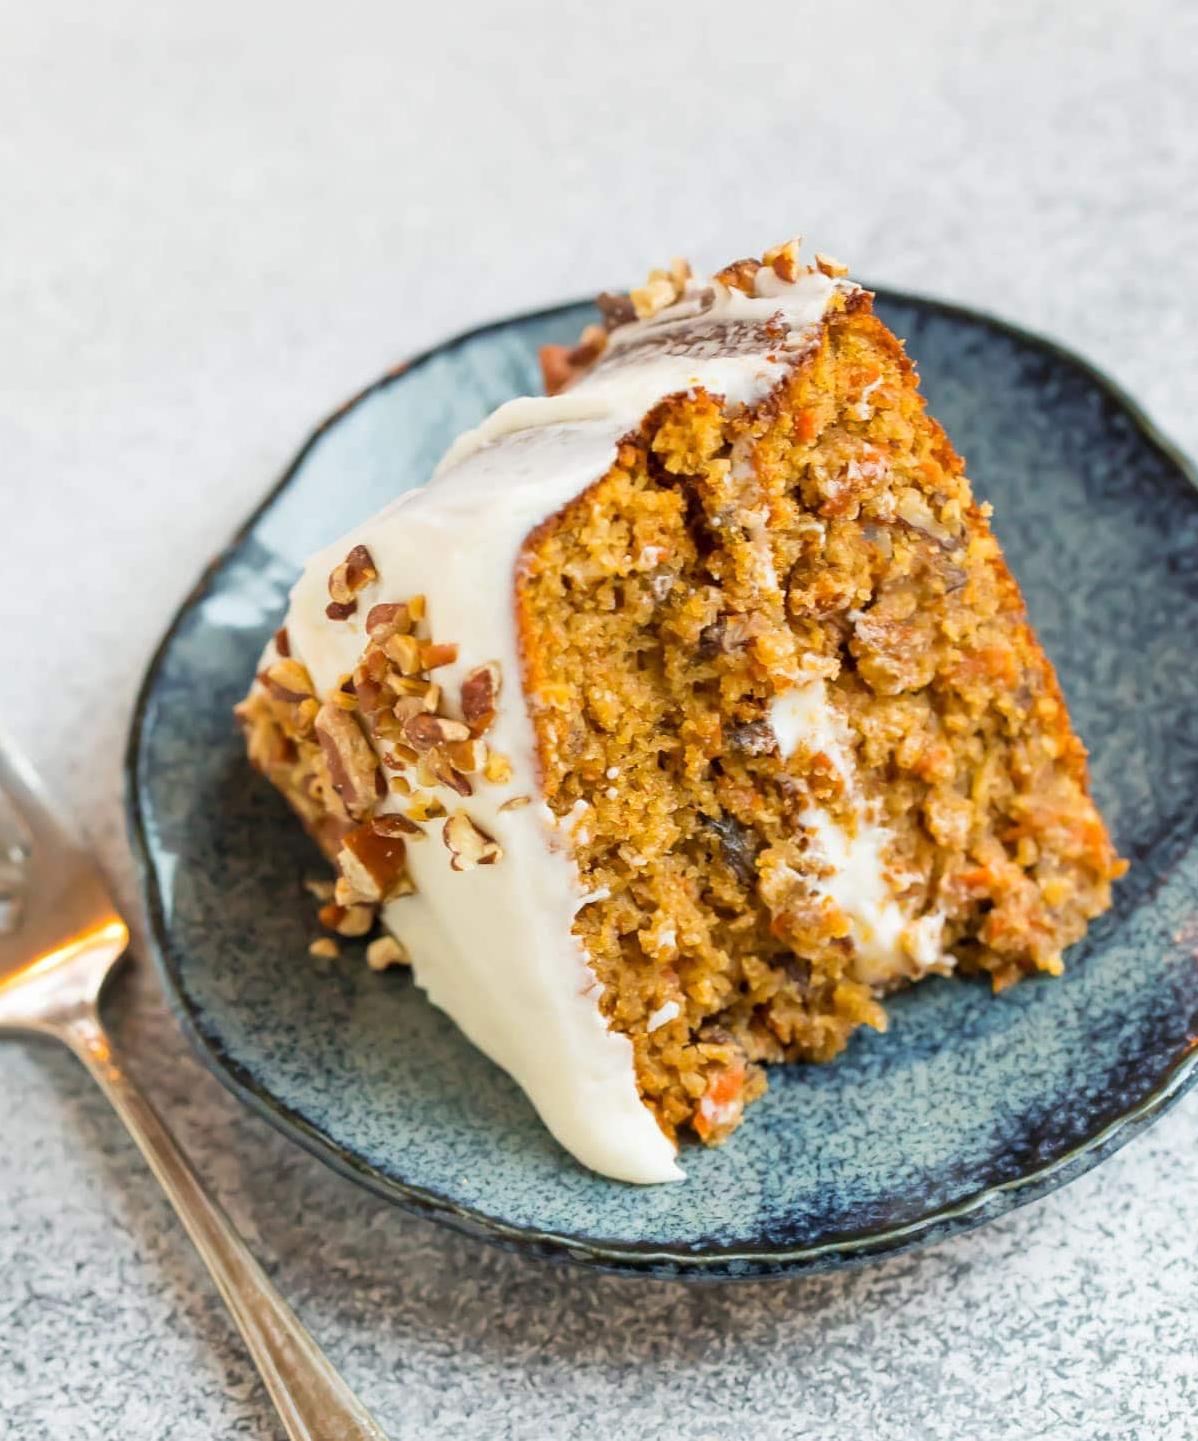  You won't believe this moist and delicious cake is made without gluten and sugar!